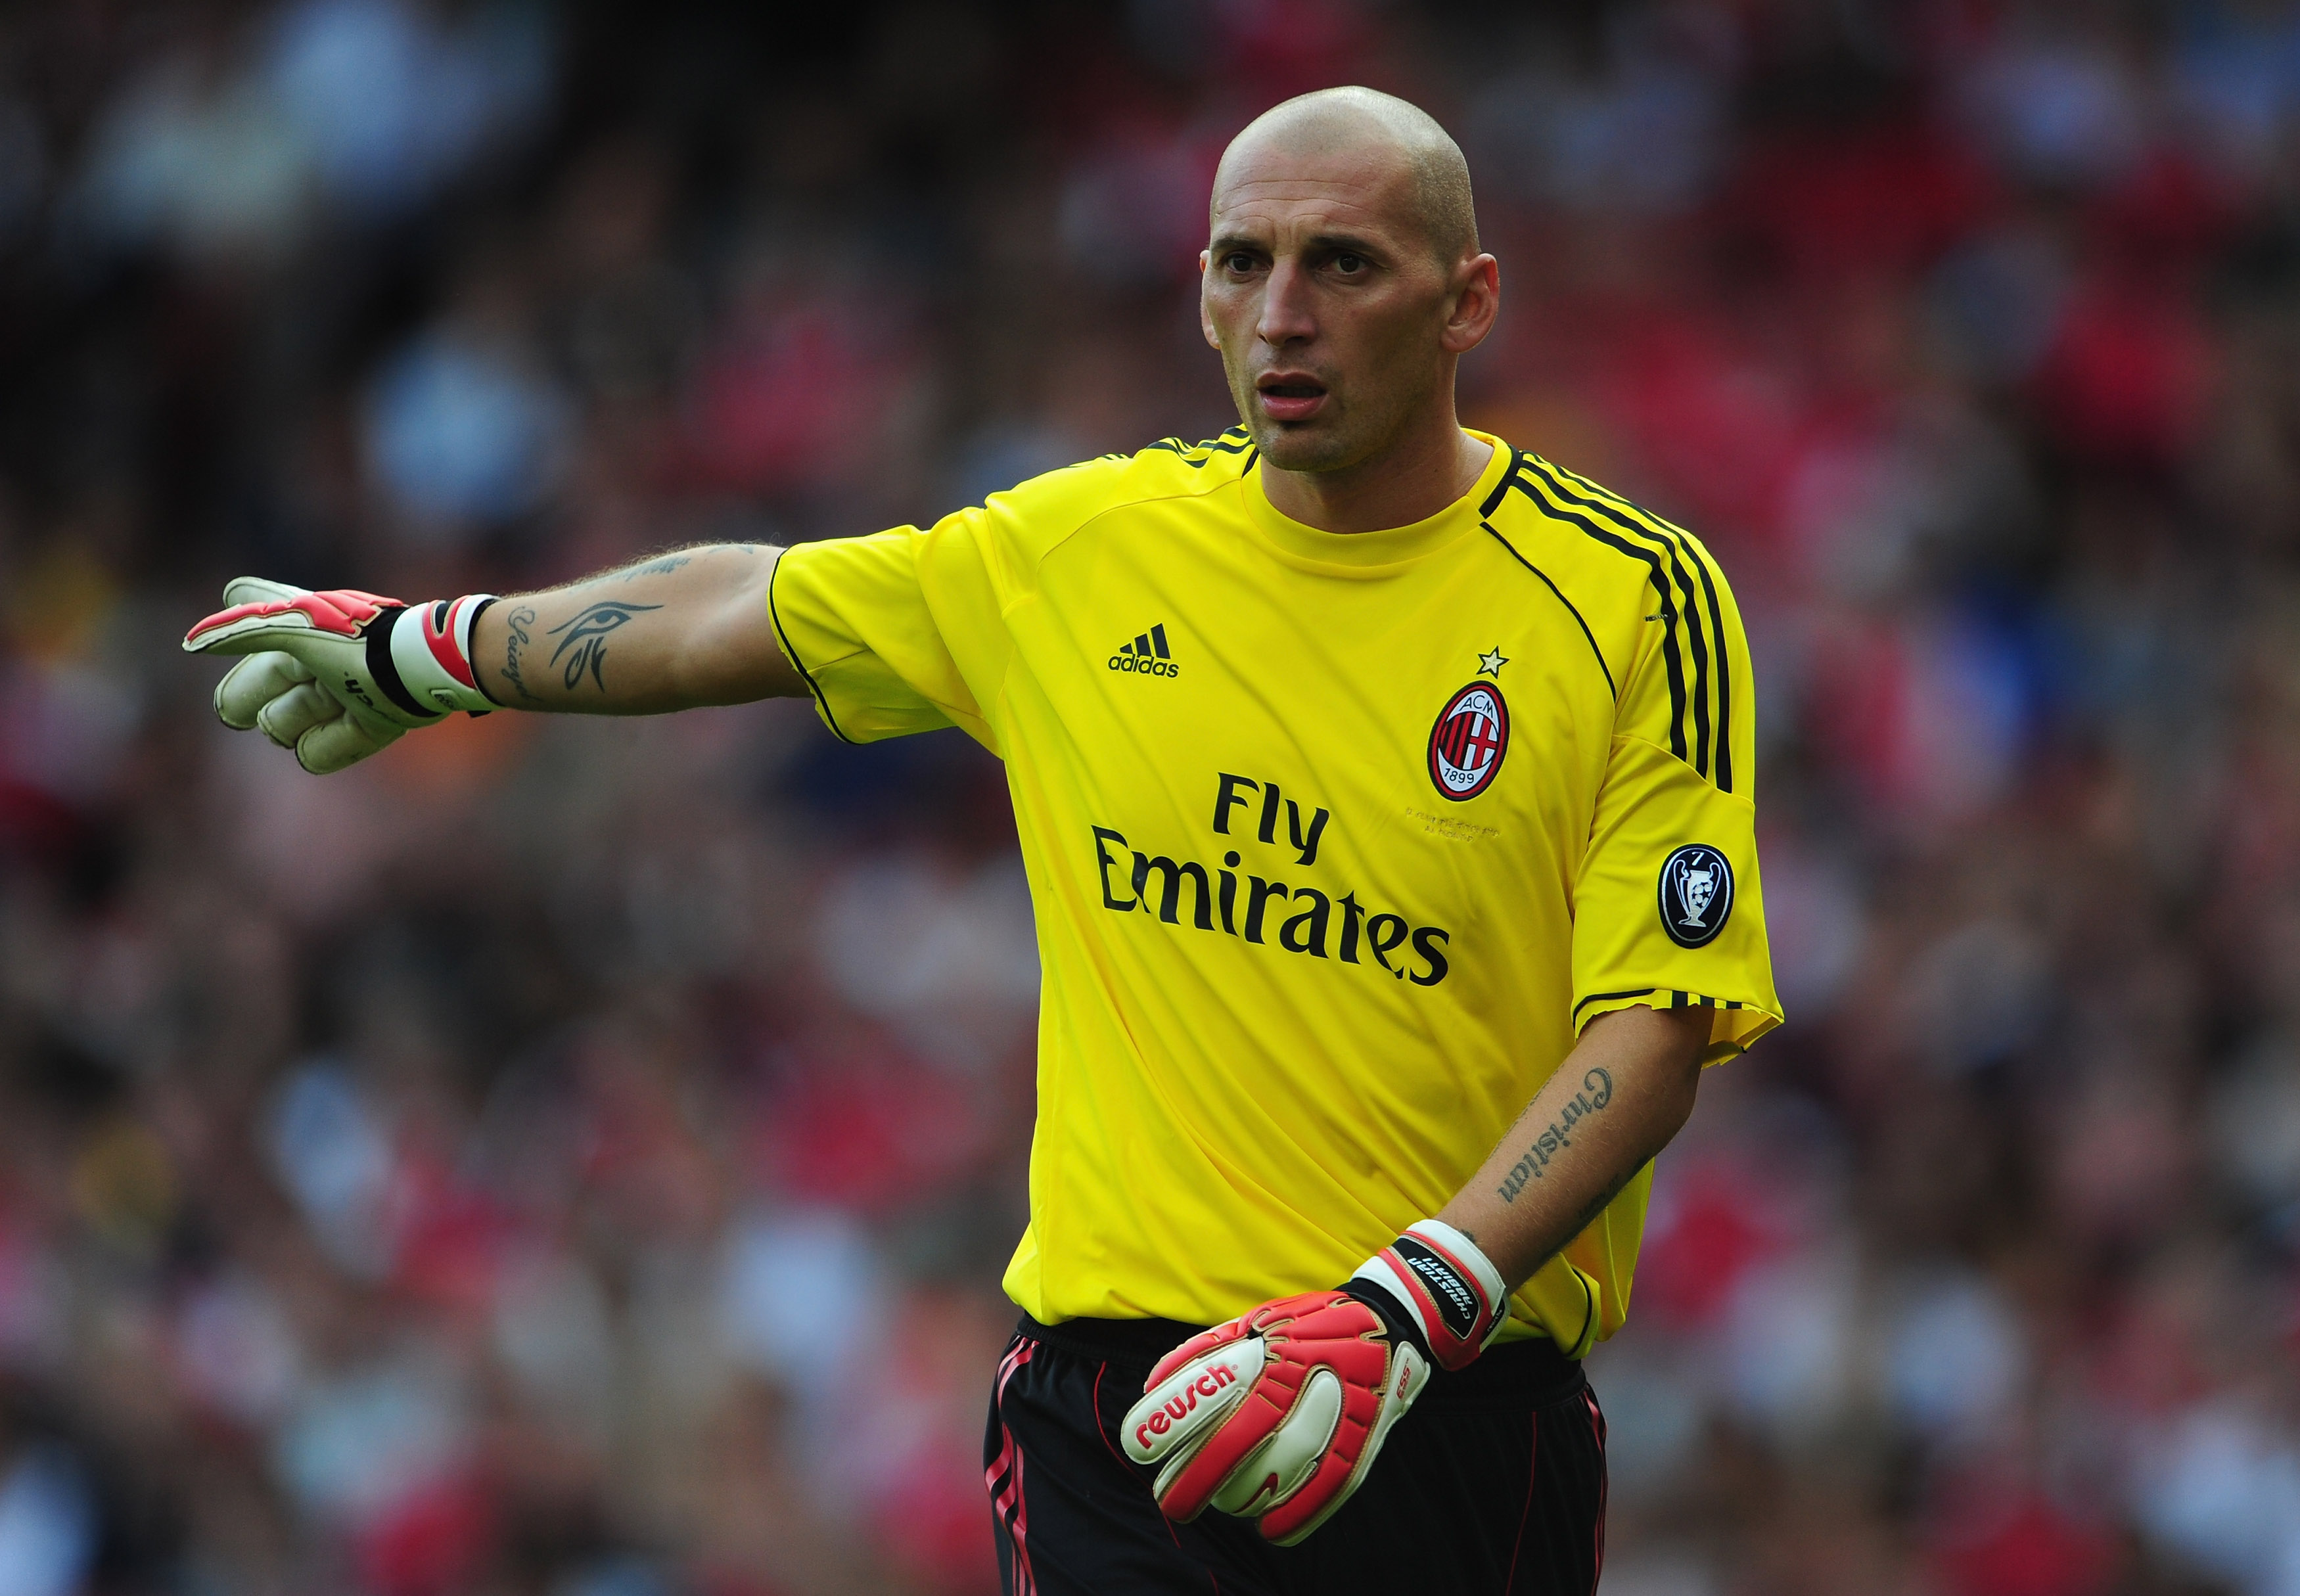 After years of loans, Abbiati has returned to Milan and established himself as the #1.